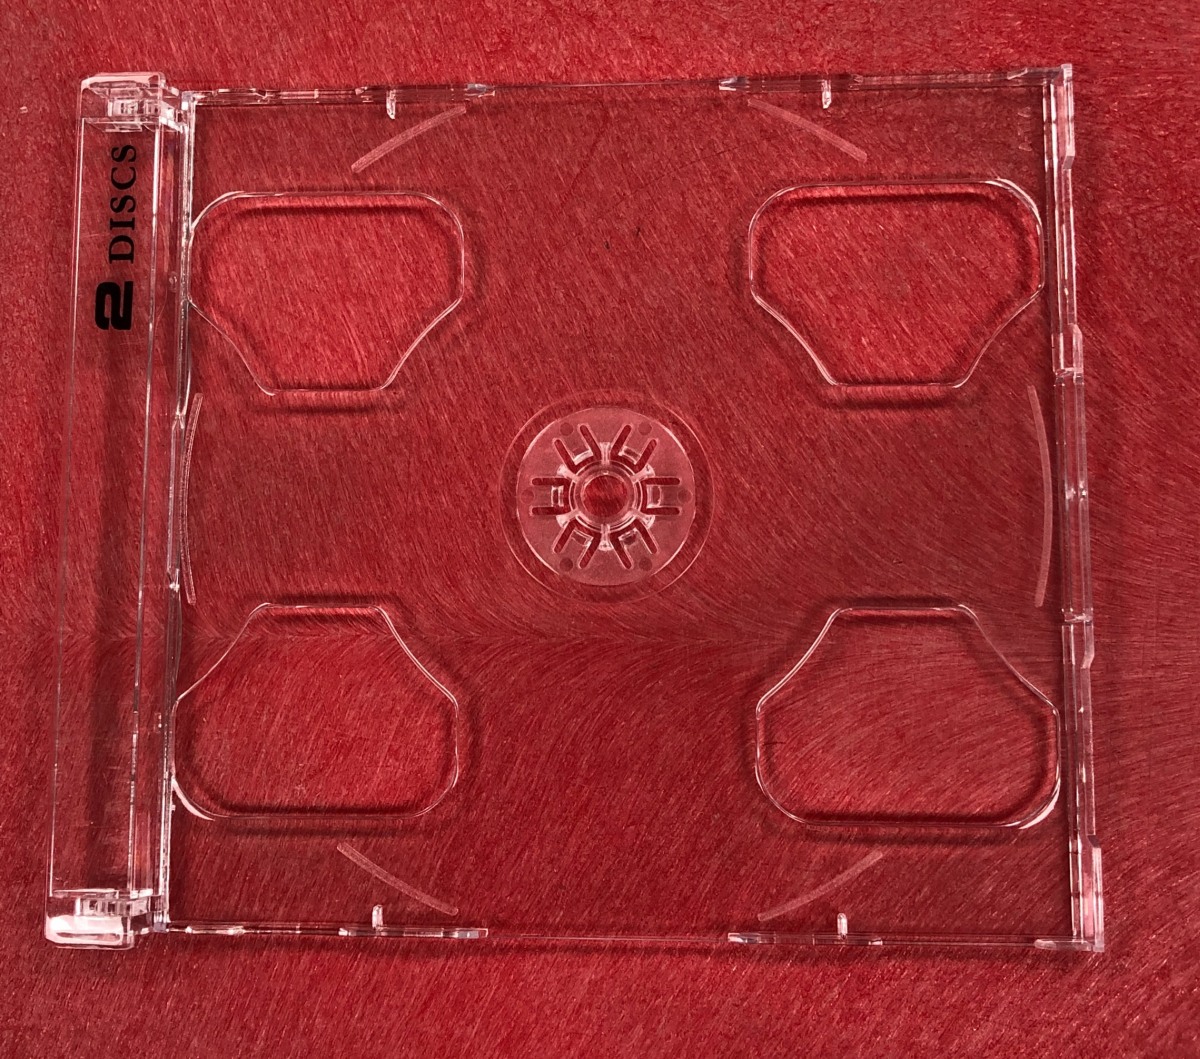 2-CD Clear Smart Trays With 2 DISCS Logo